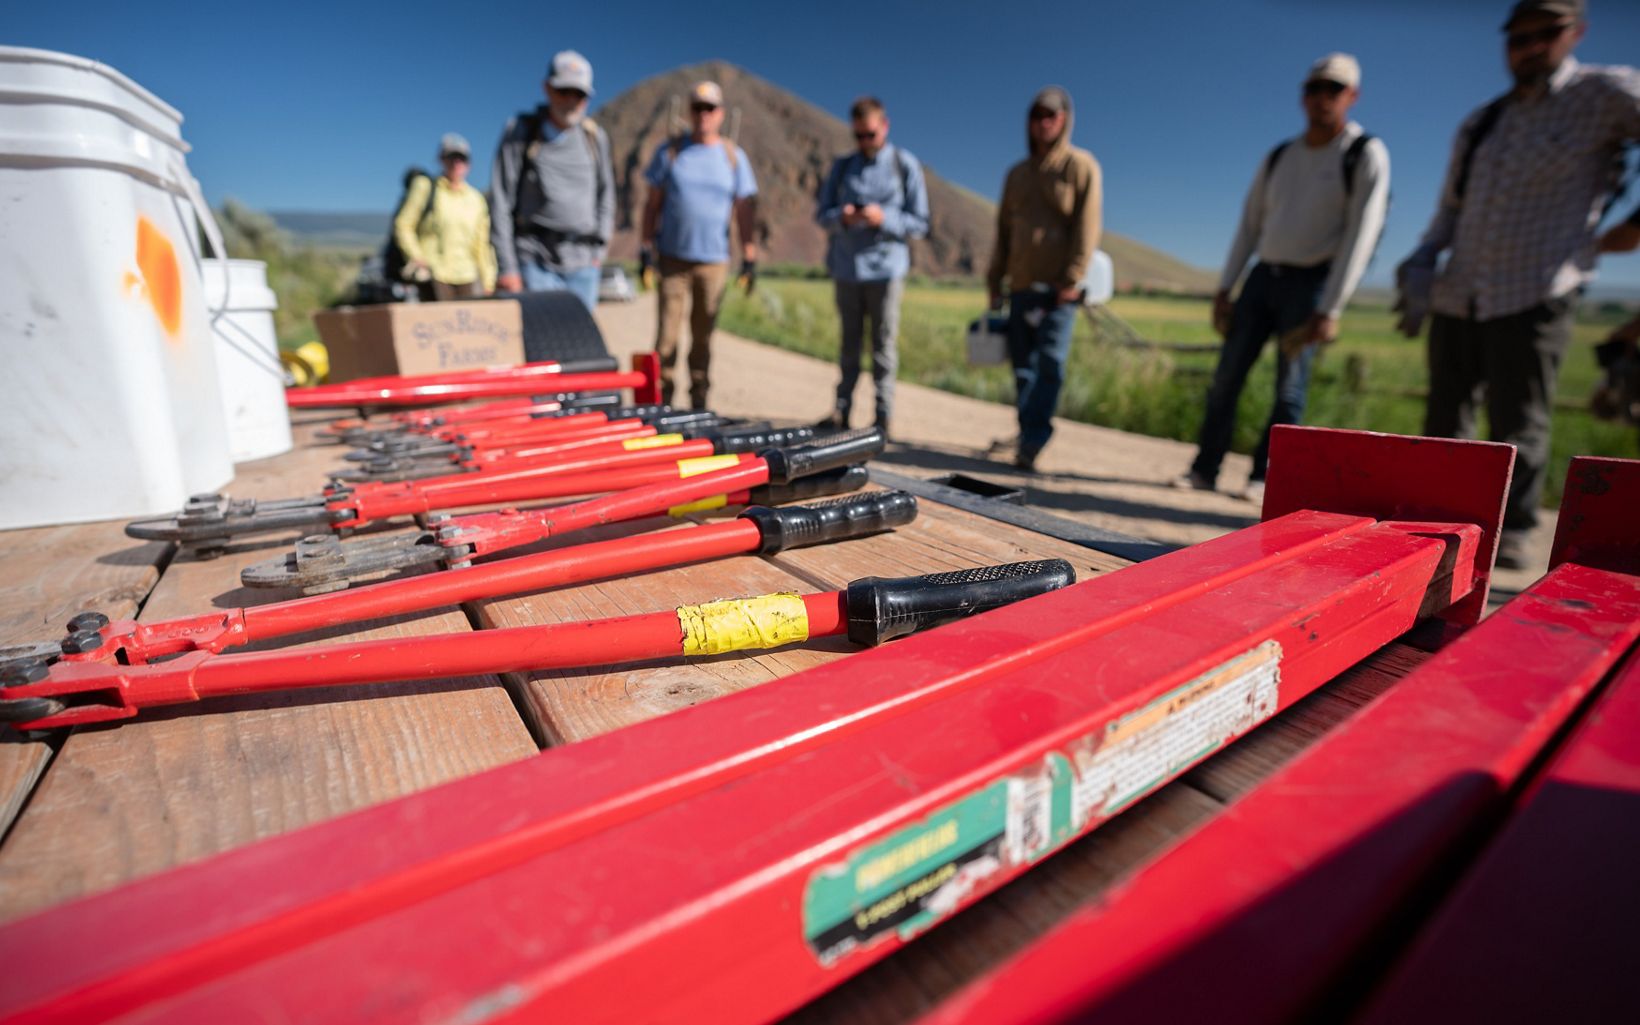 Tools lined up Tools are lined up for crew members as the workday begins.  © Jeremy Roberts/Conservation Media